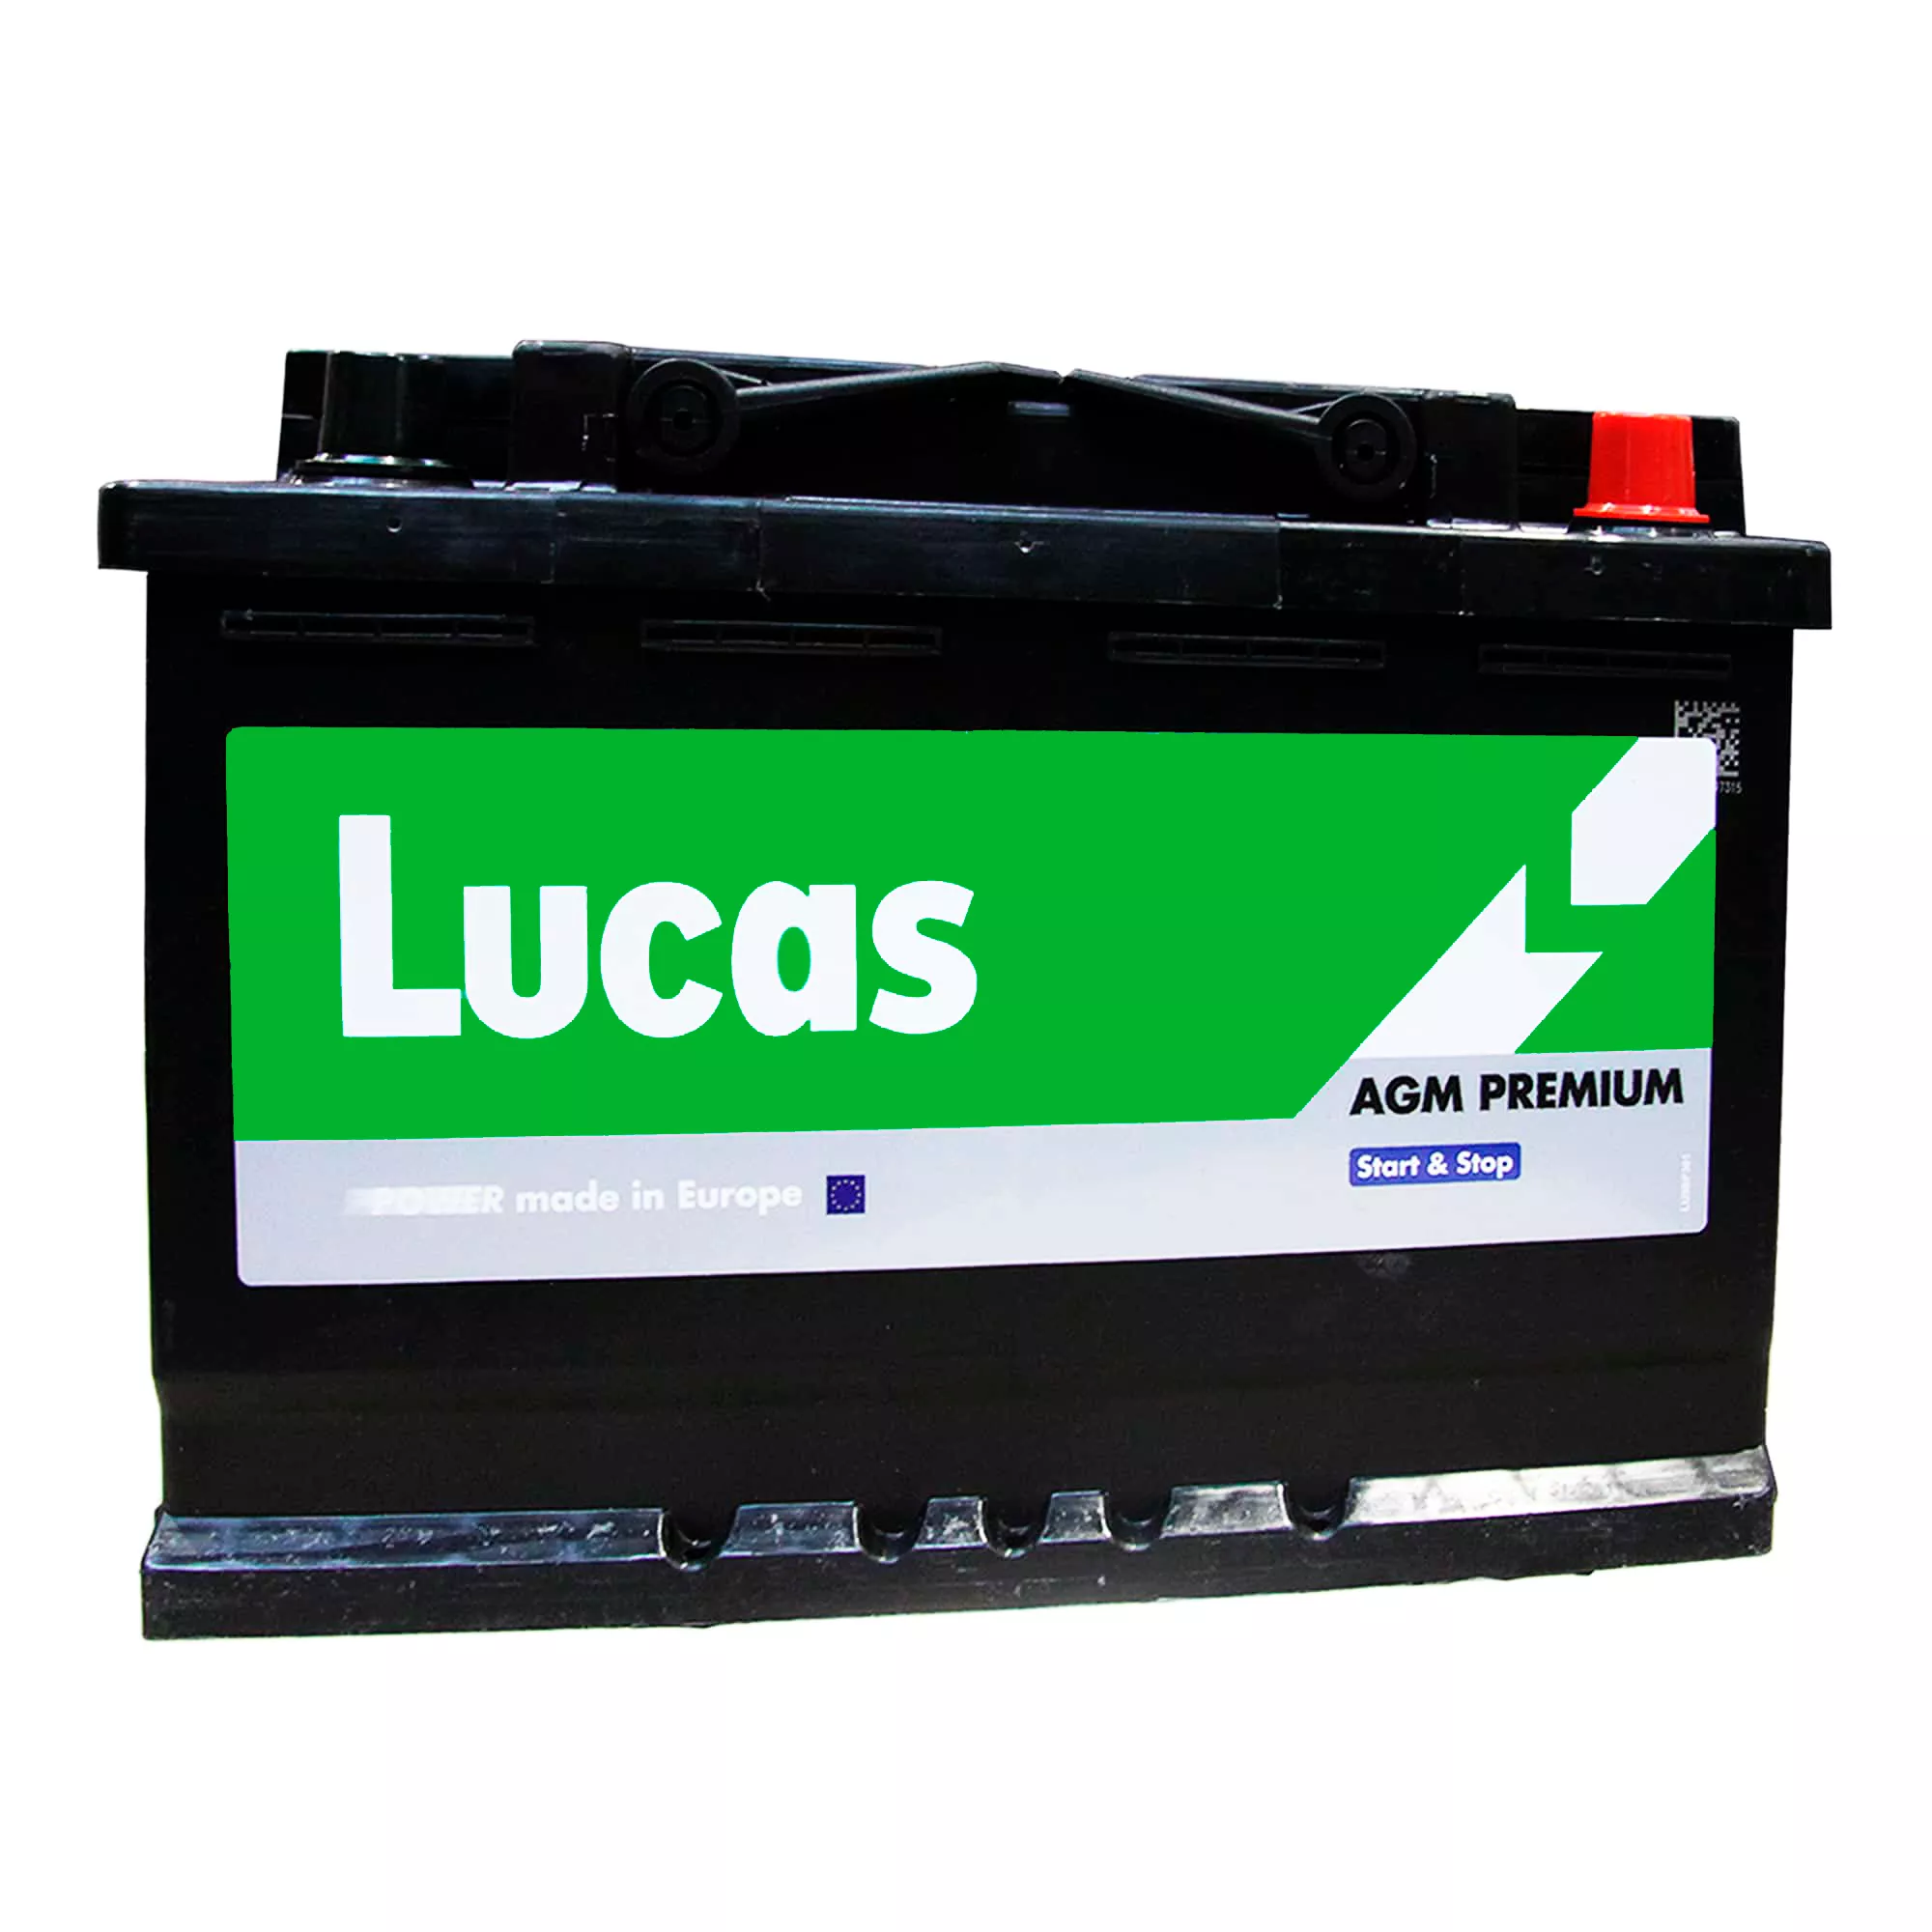 Аккумулятор Lucas (Batteries manufactured by Exide in Spain) 6CT-70 АзЕ AGM Start-Stop (LBAGM004A)